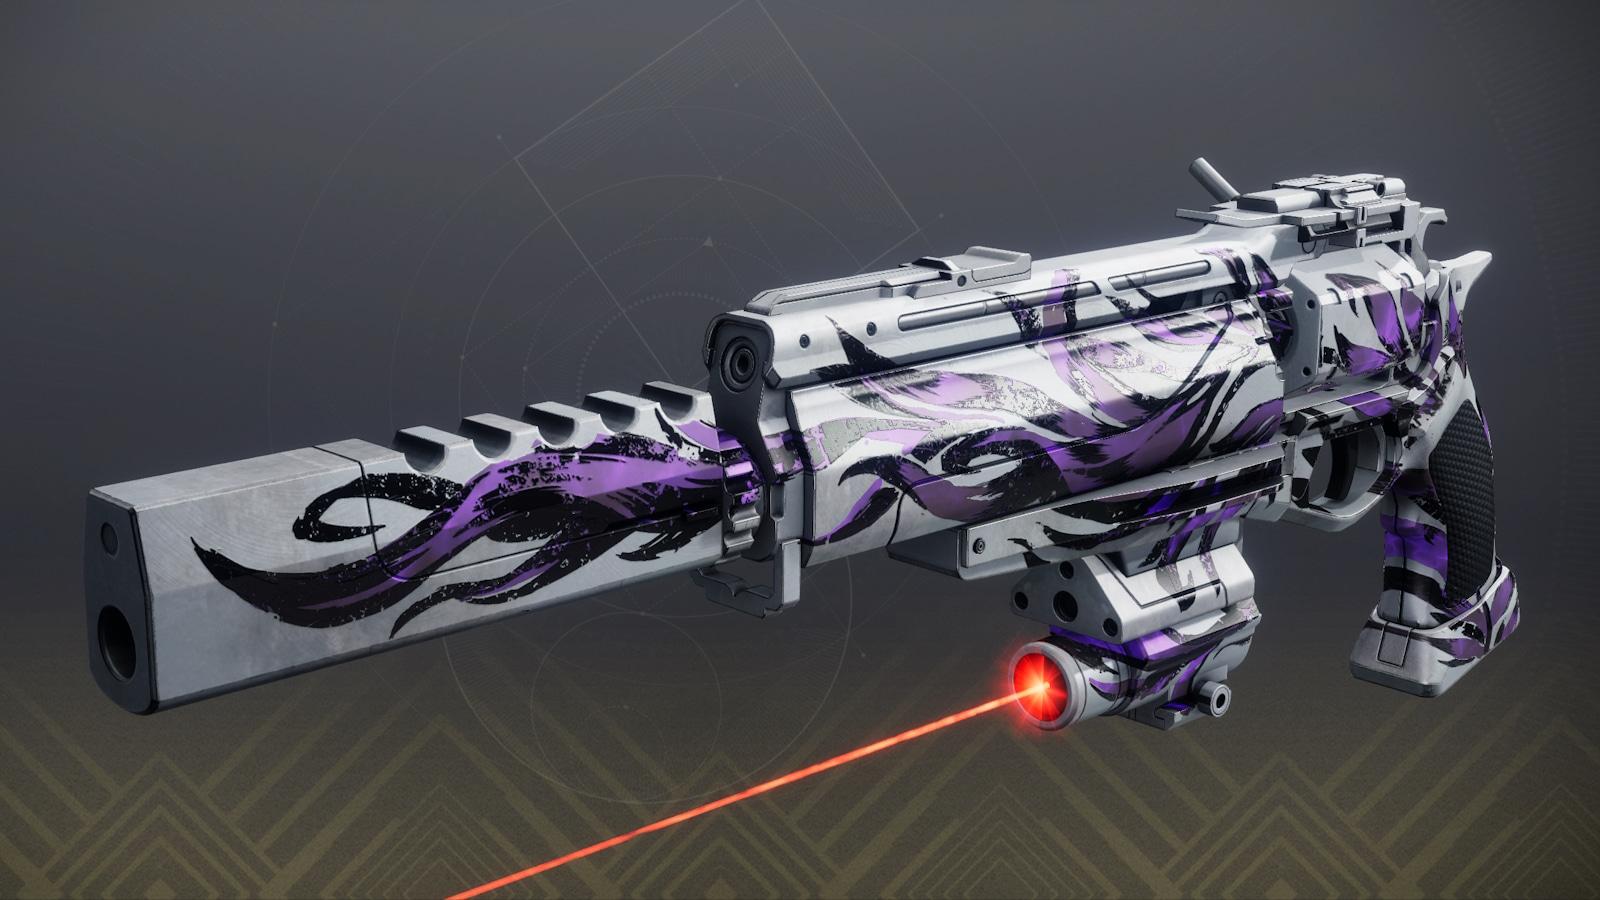 The Epochal Integration solar Hand Cannon in destiny 2 as seen in weapon preview.